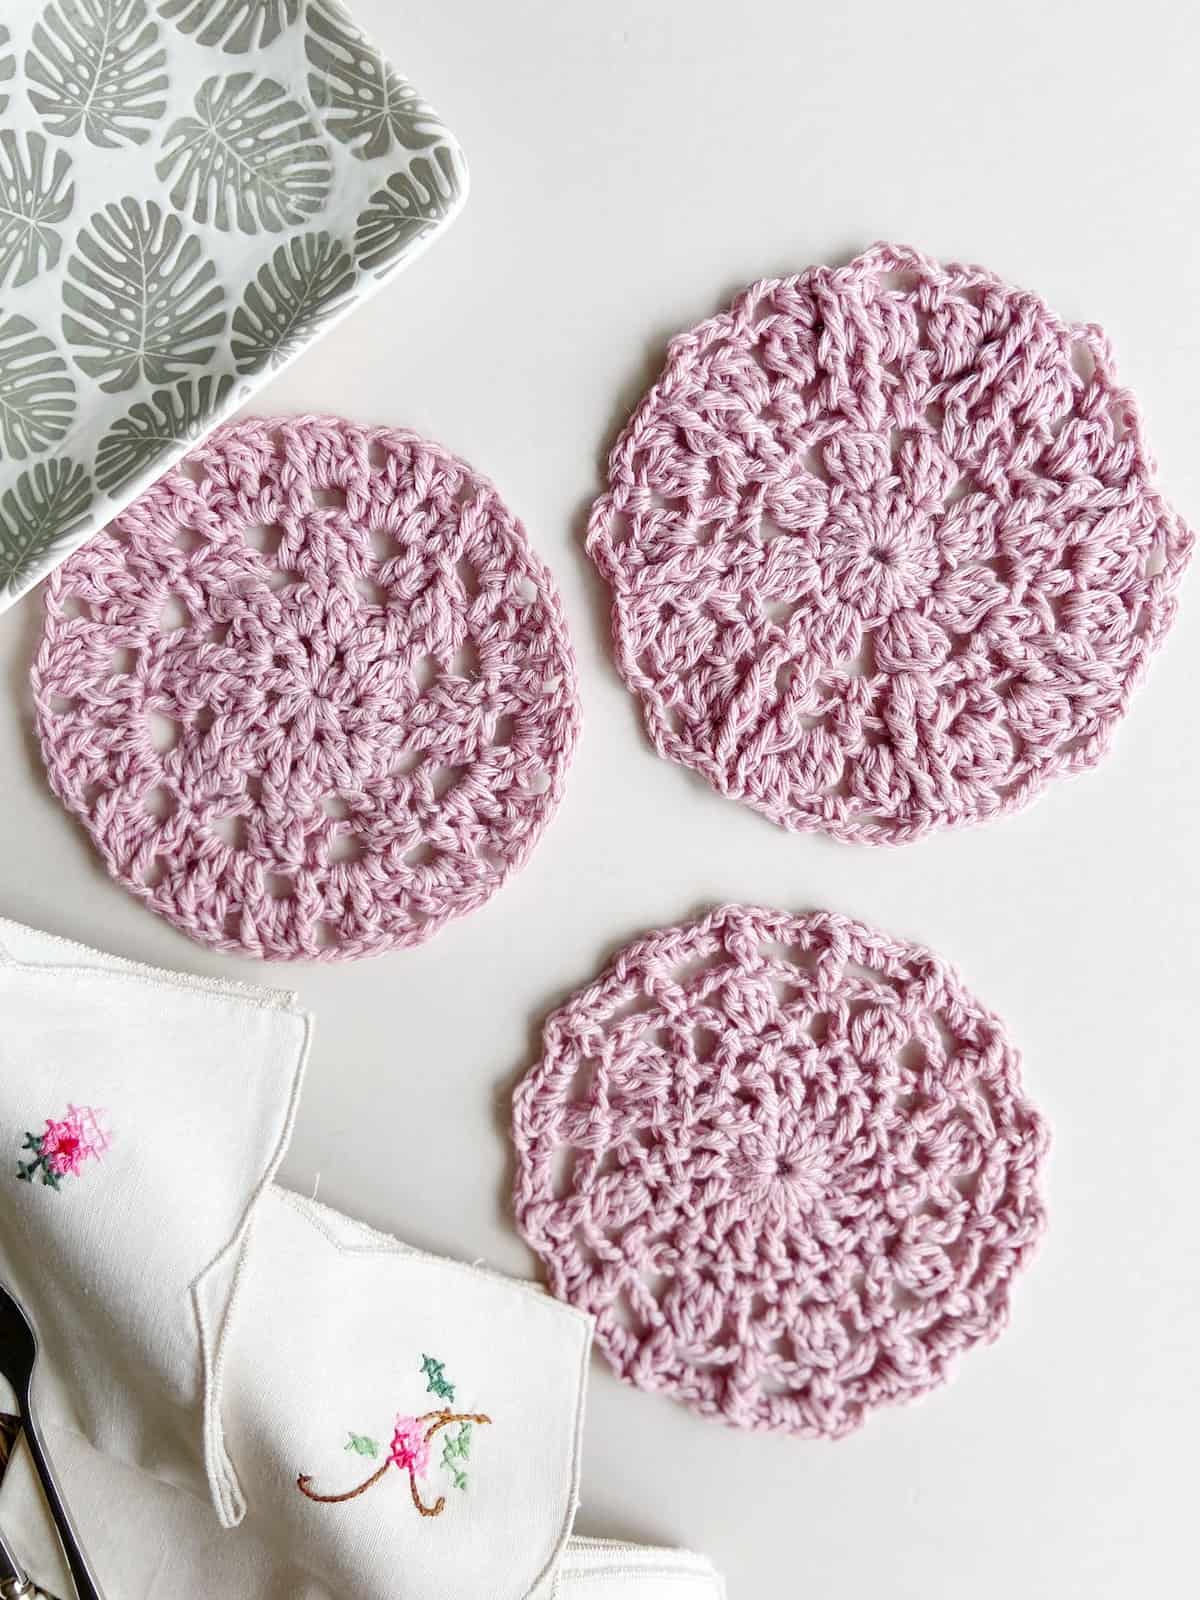 Detail picture of free crochet coaster pattern in pink.